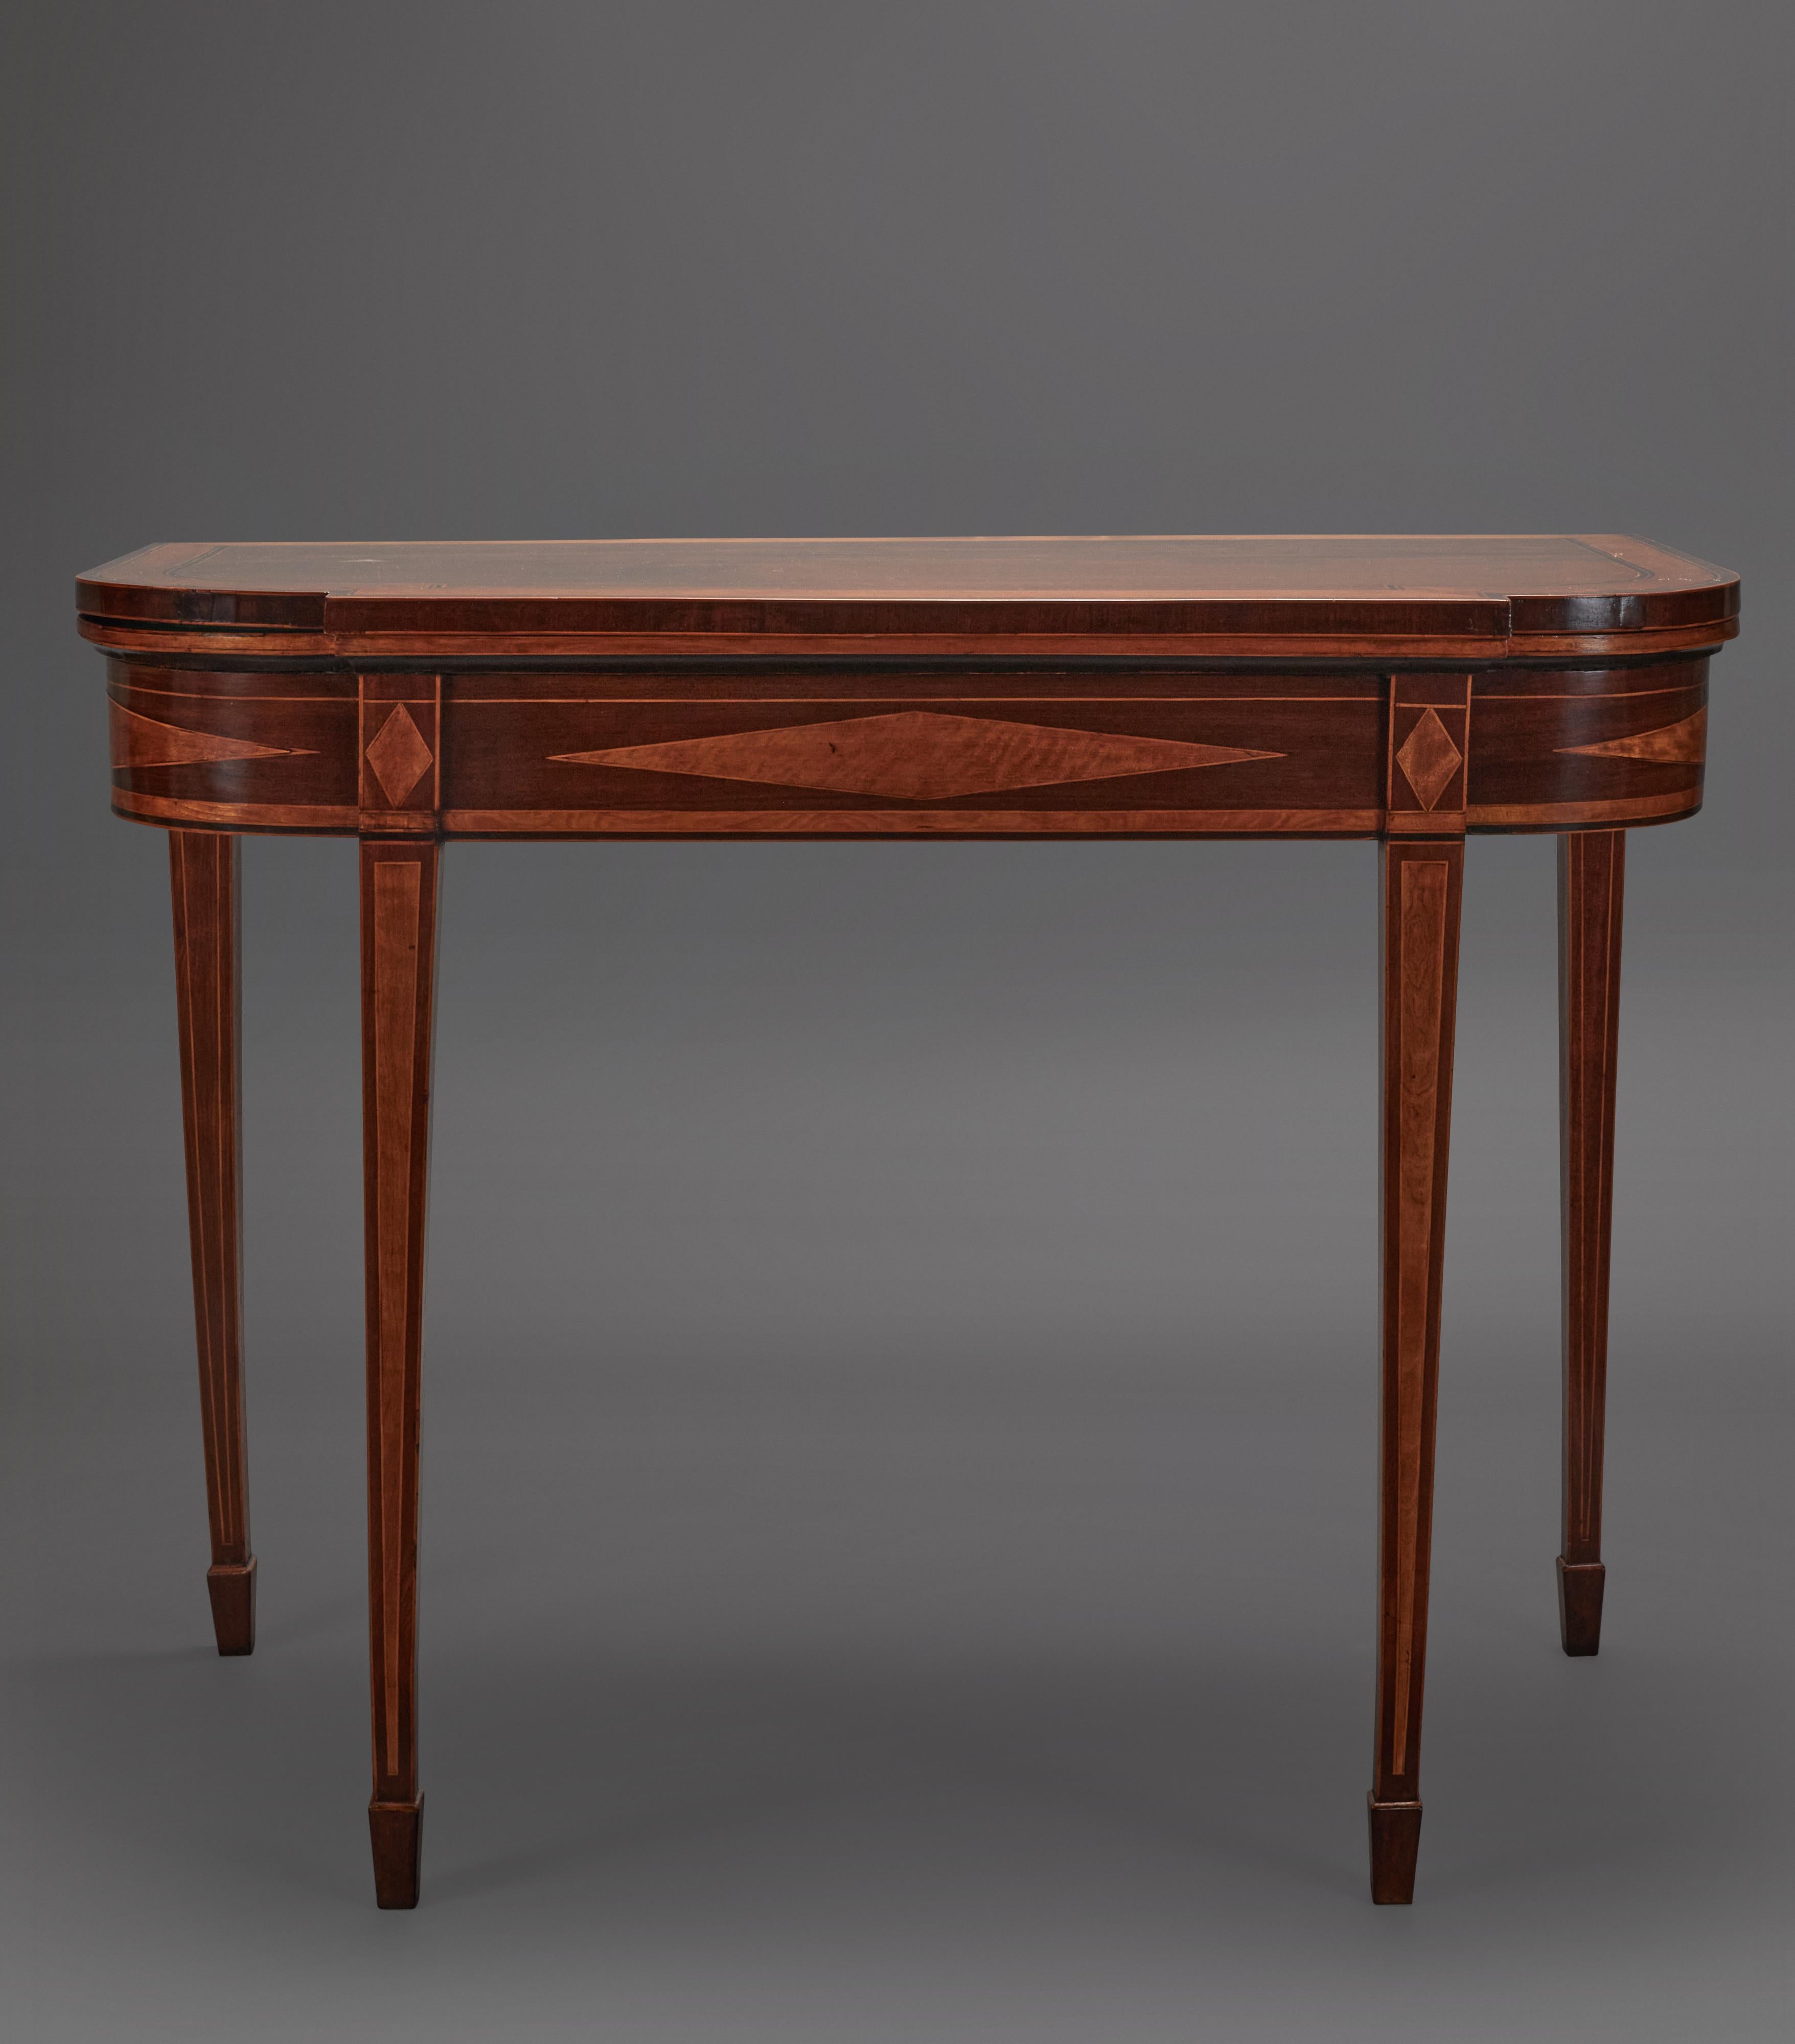 Mahogany and satinwood banded and inlaid that opens up to a felt top. 4 squared legs, 2 that are hinged and pull out for opened position. Brass hardware. table open: 36 1/2